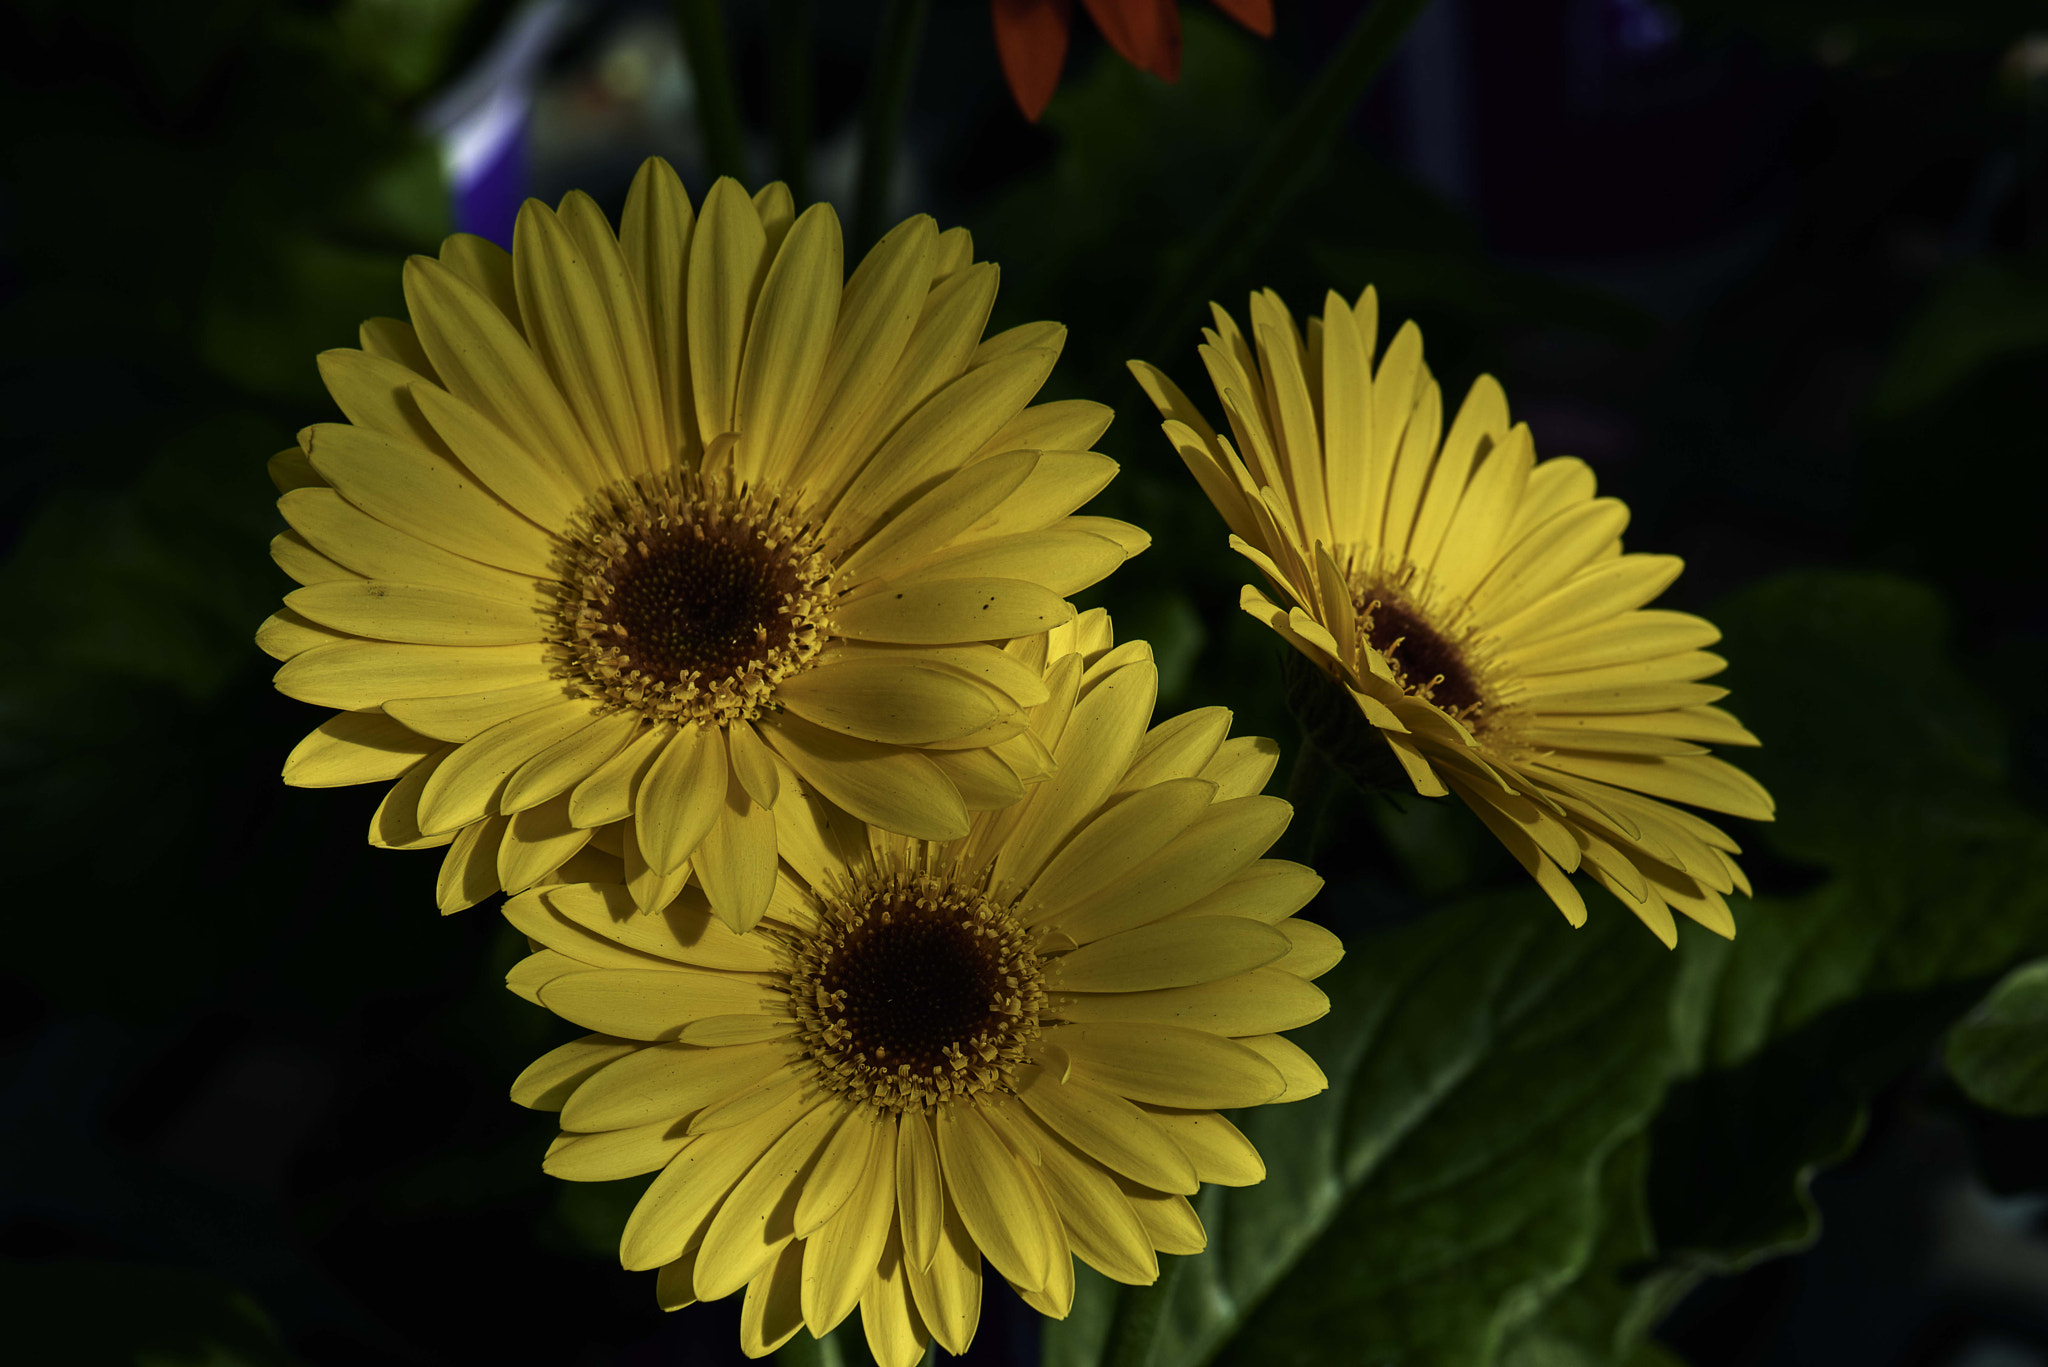 Nikon D800 + Nikon AF-S Micro-Nikkor 105mm F2.8G IF-ED VR sample photo. Three is company......yellow daisies photography